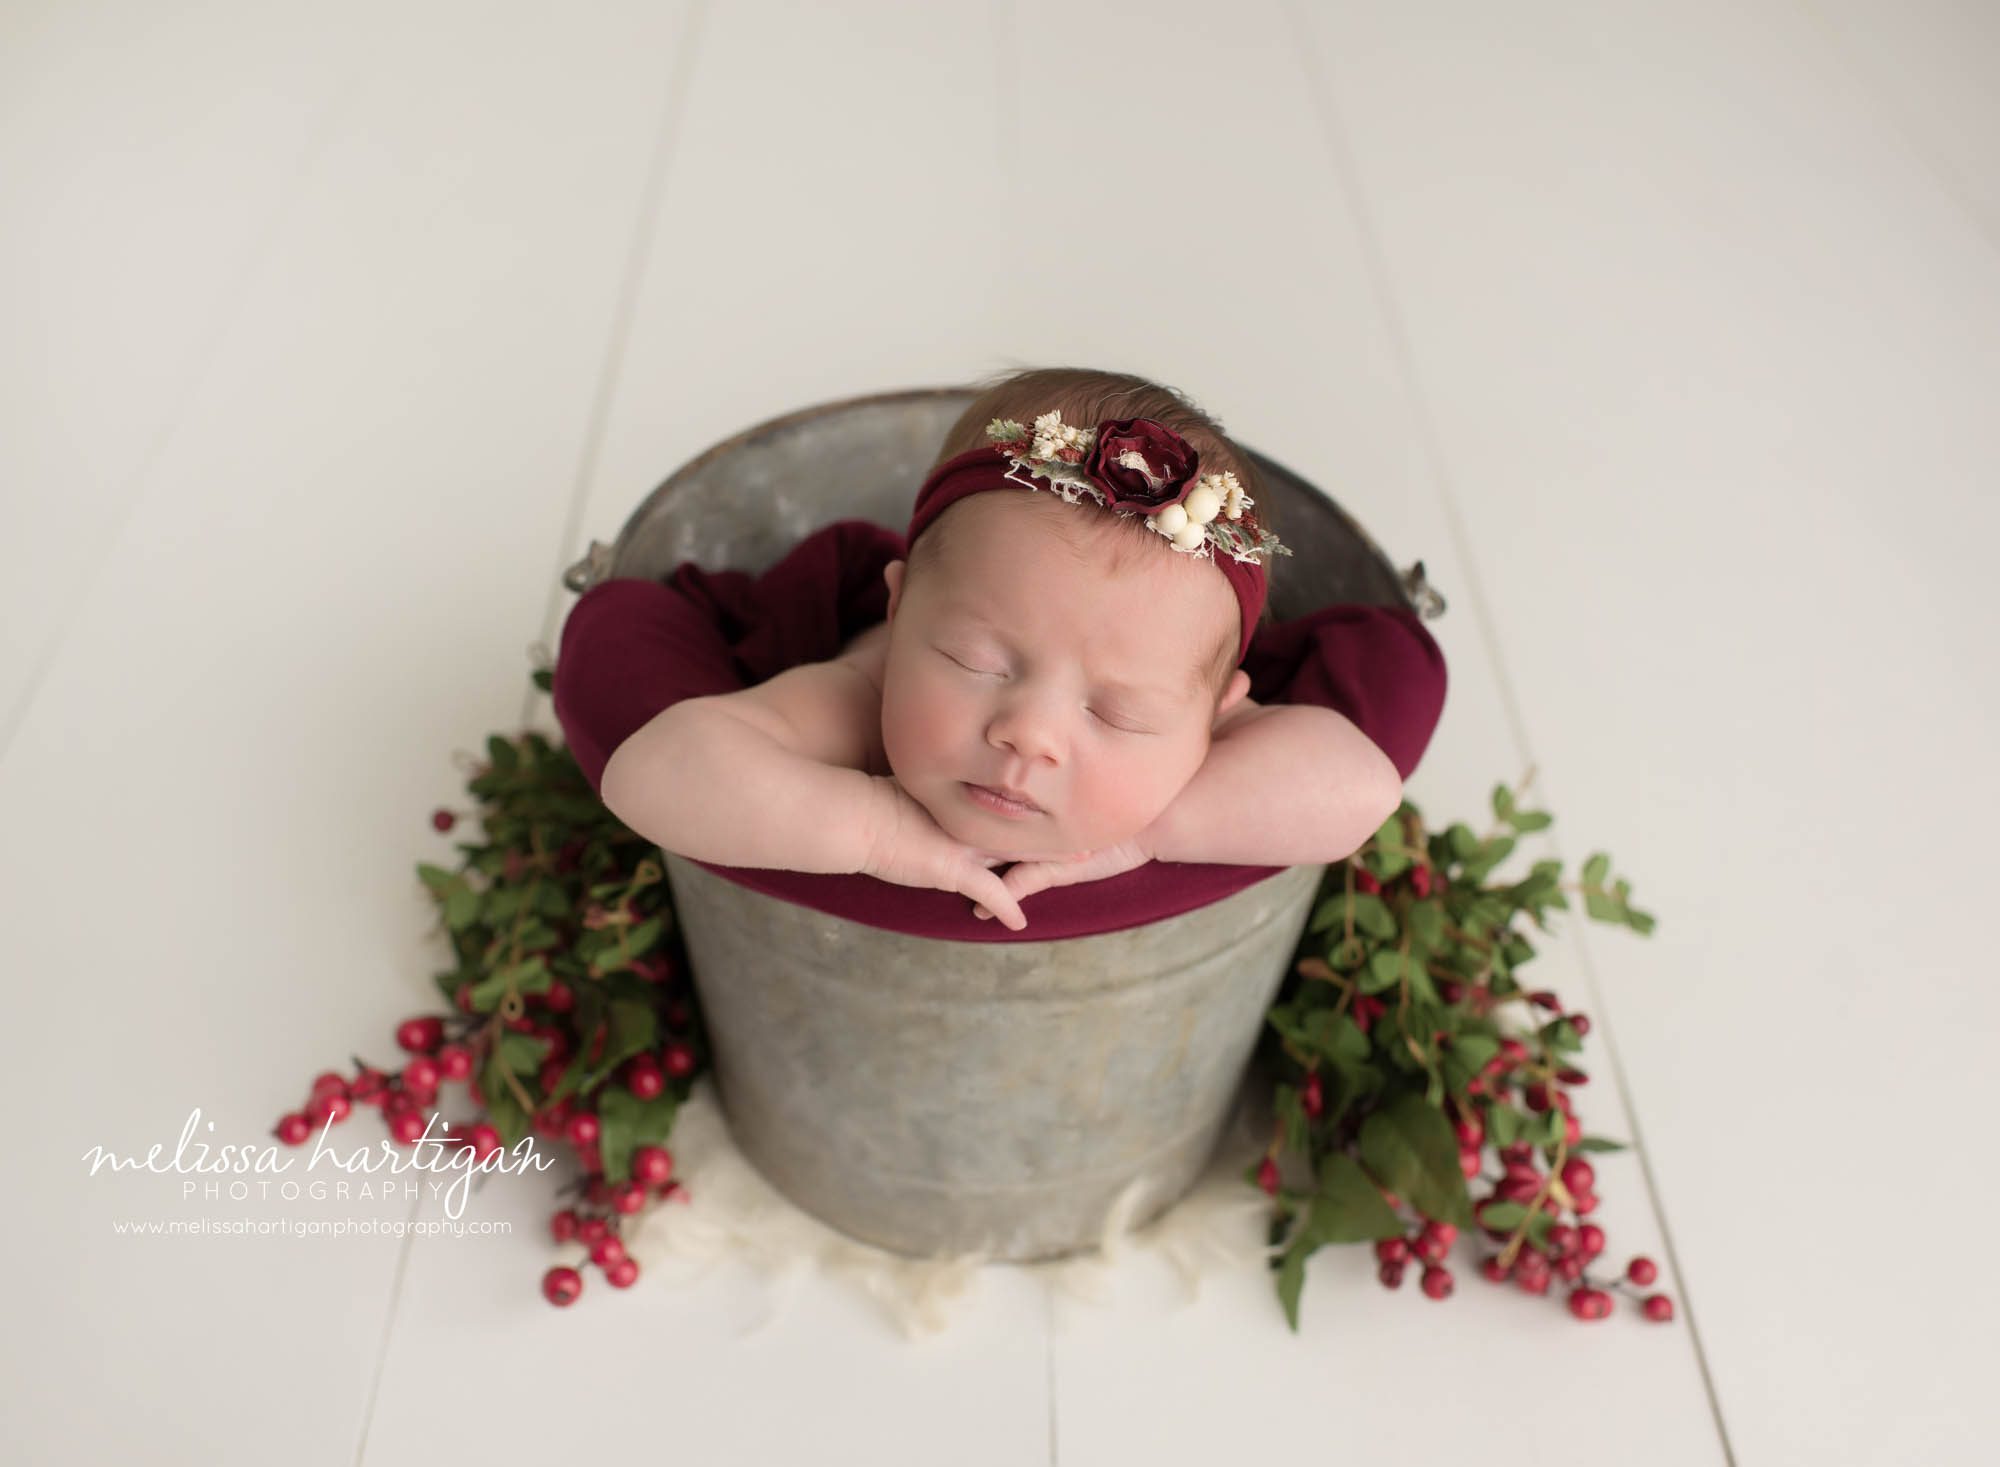 newborn baby girl posed in bucket wearing red headband with red and green foilage elements